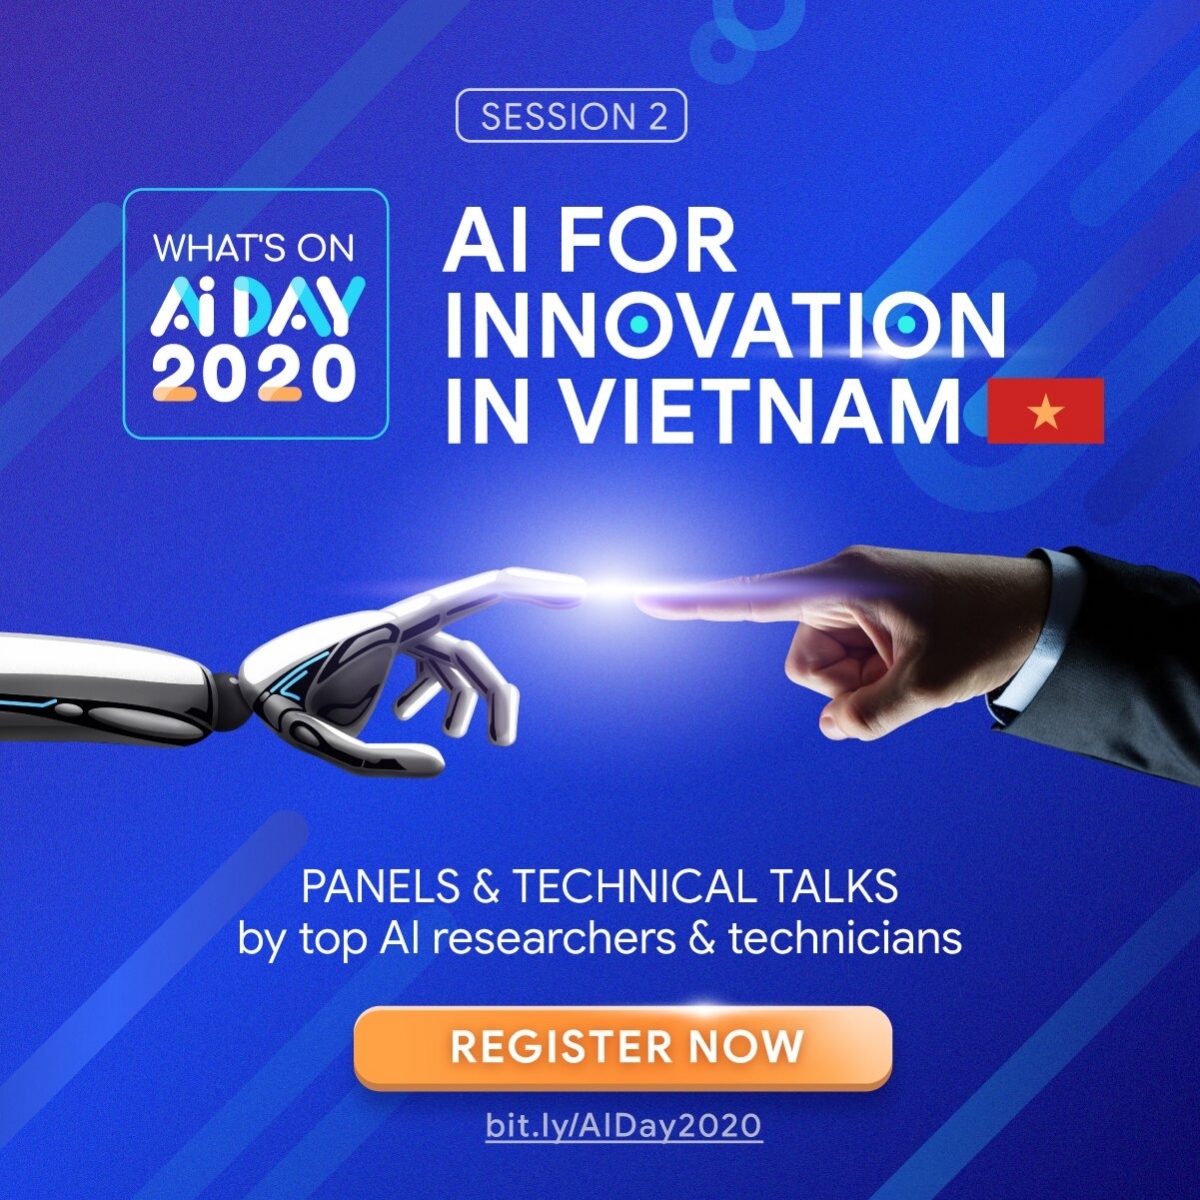 Artificial intelligence in technical innovation is one of the major themes of AI Day 2020